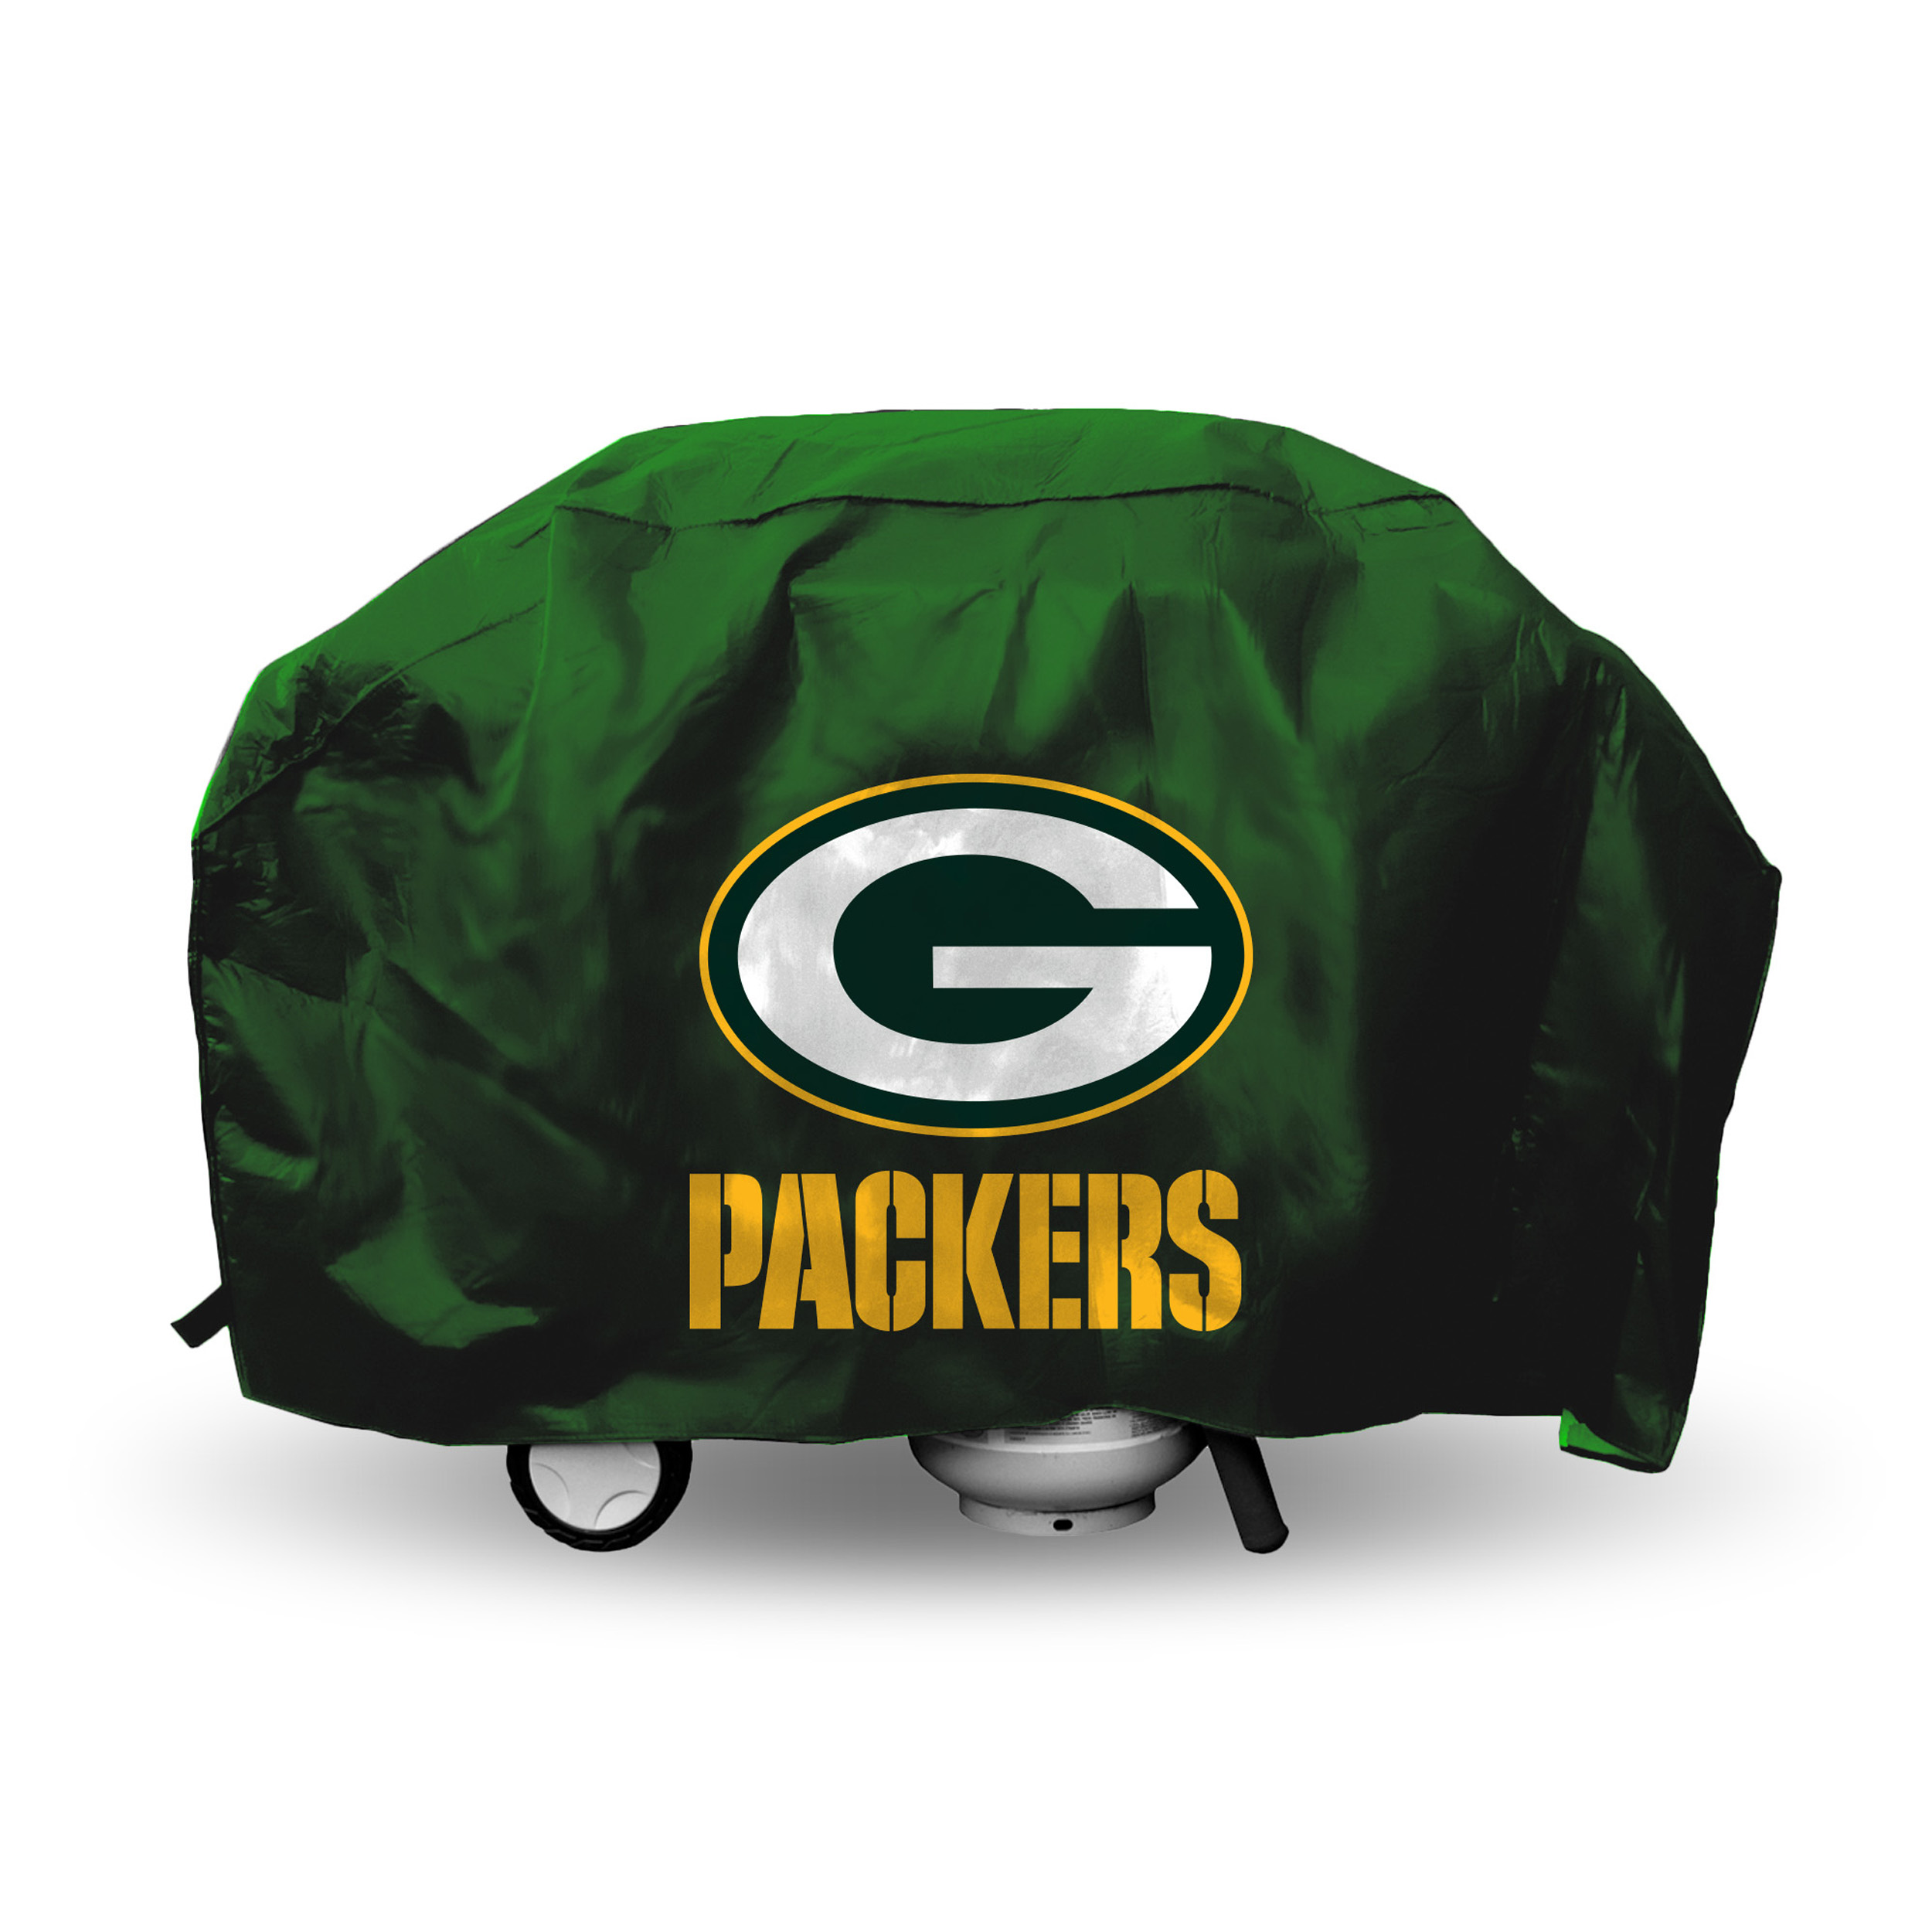 Rico Industries NFL - Economy Grill Cover, Green Bay Packers, Green - image 1 of 7